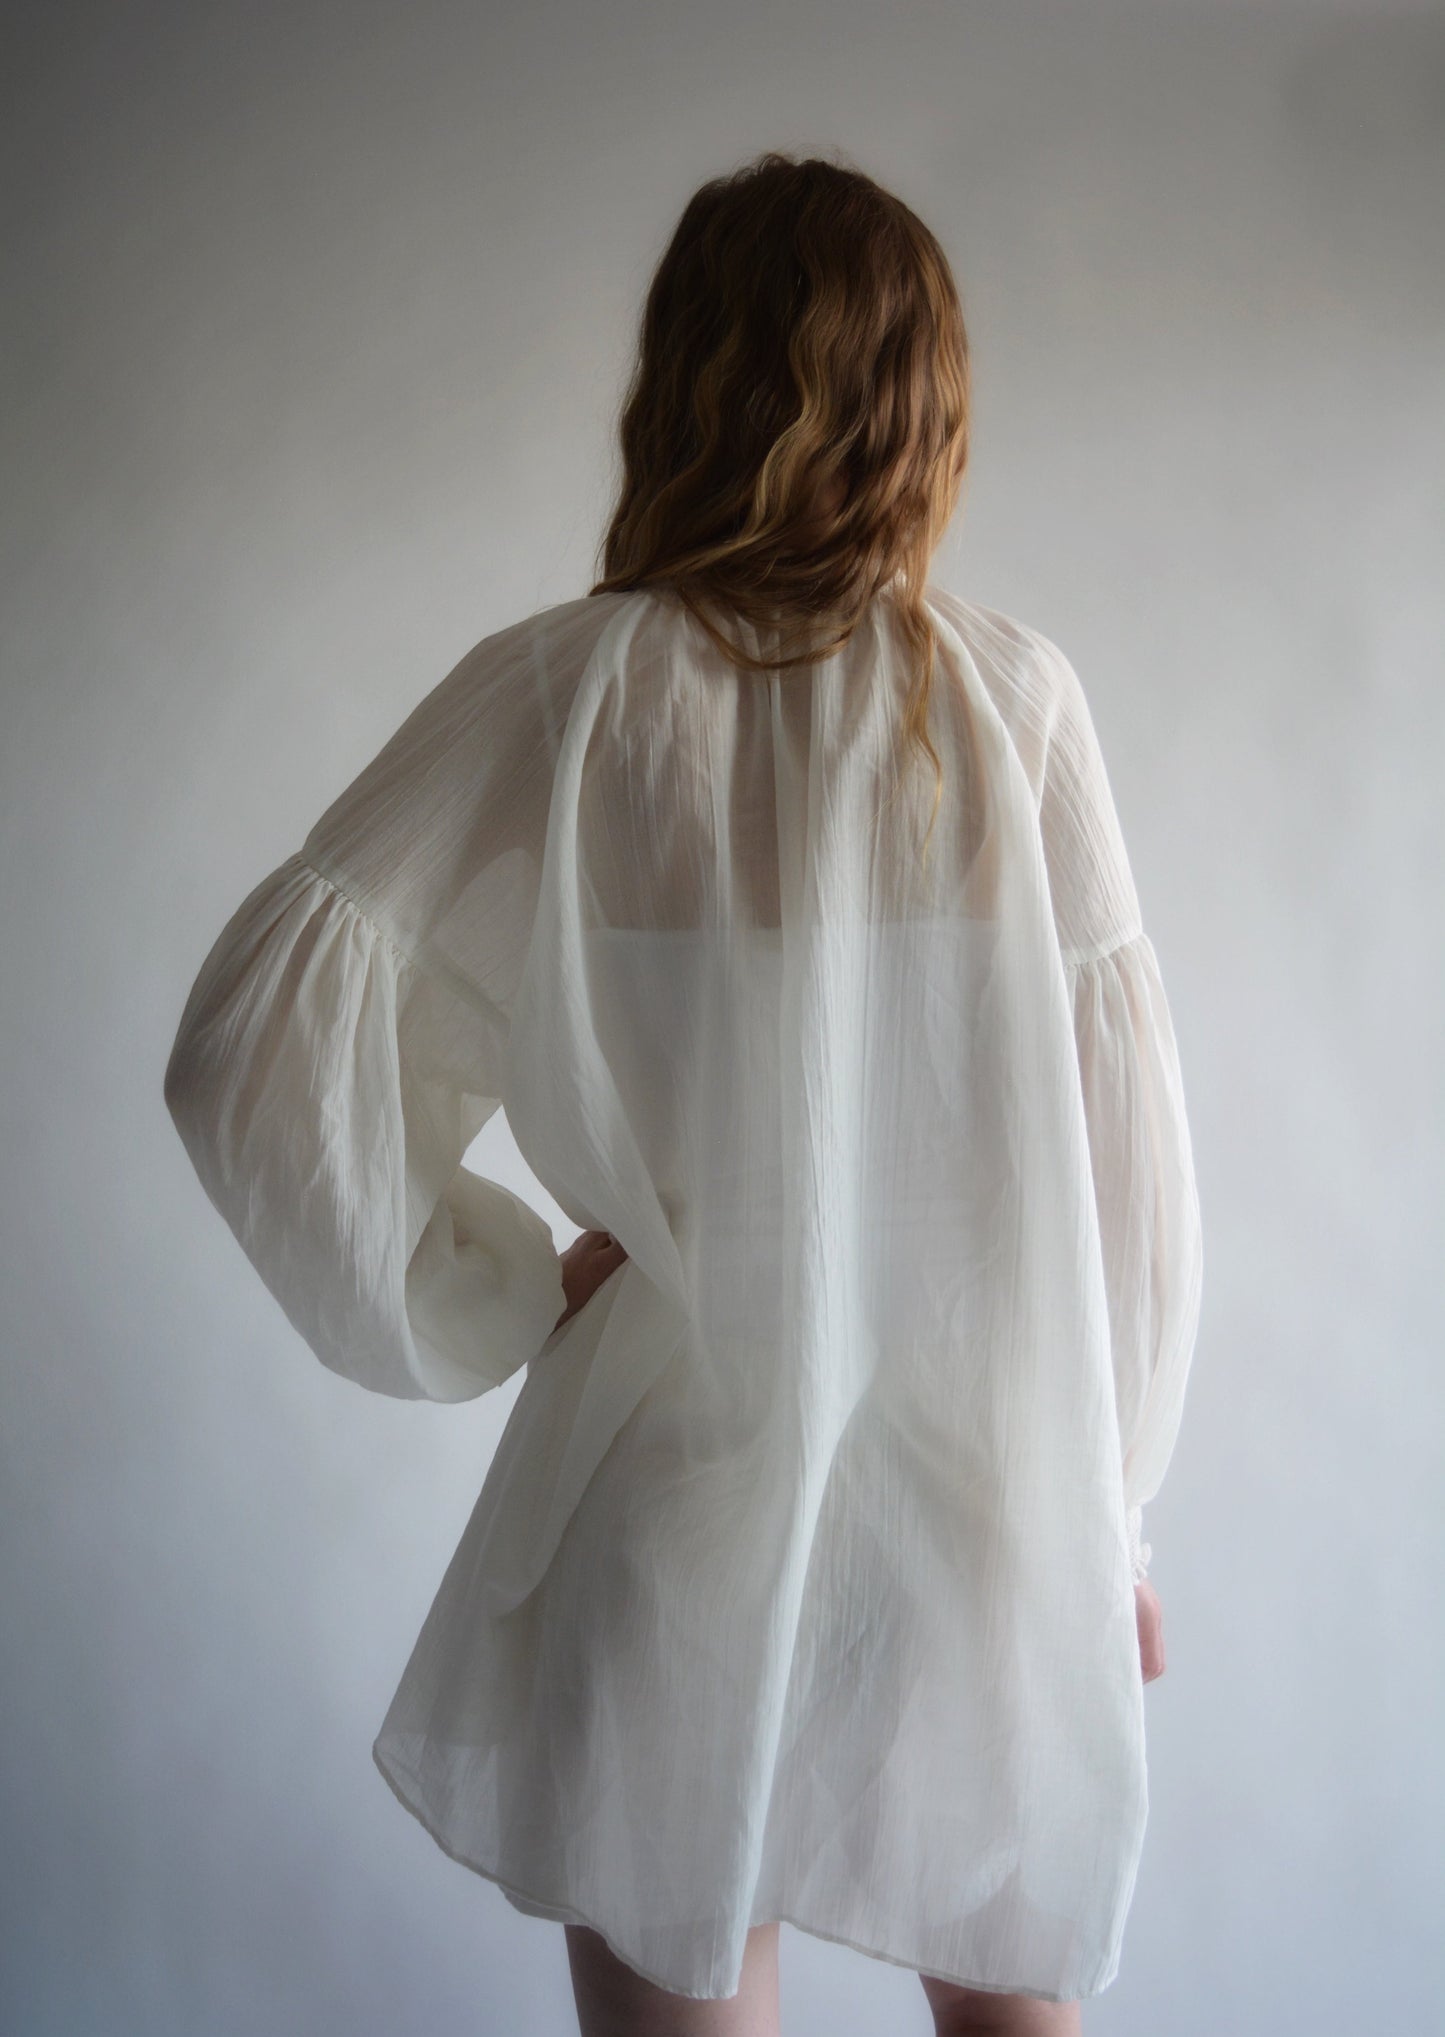 Oversized Tunic Top in White